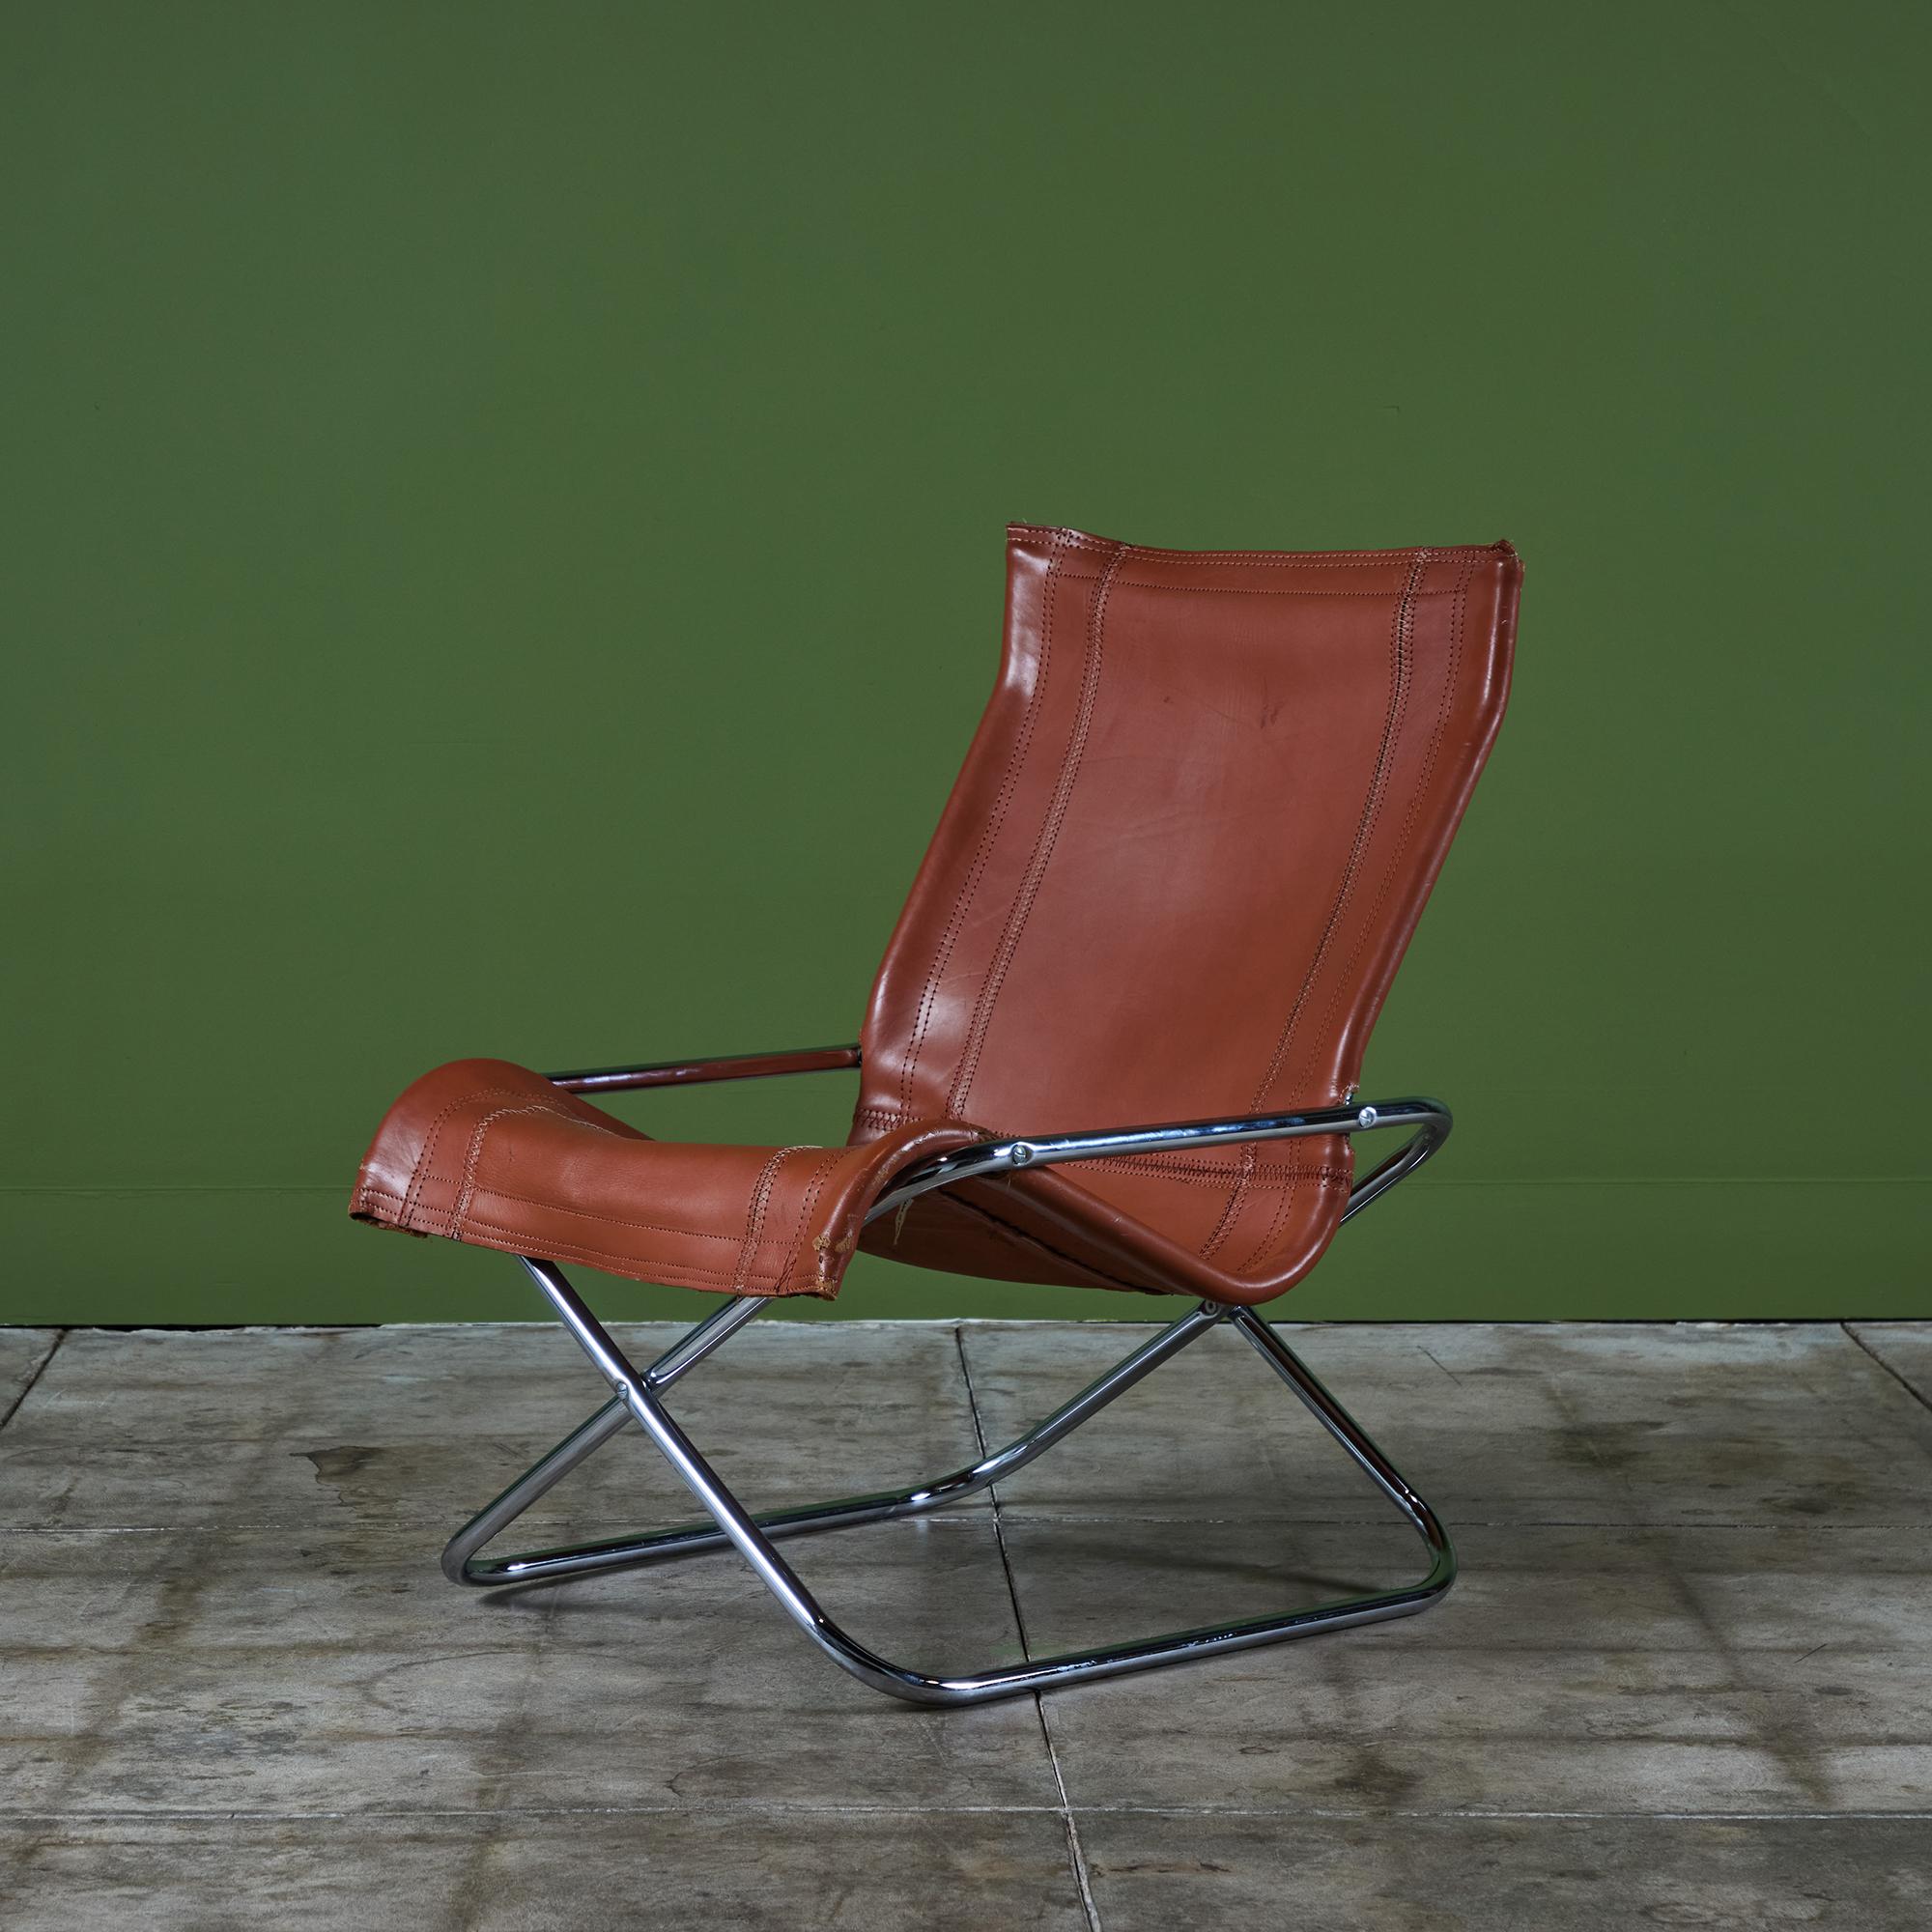 A Japanese modern folding chair, designed by Takeshi Nii, c.1970s. The chair has a chrome frame that folds up like a director’s chair for ease of storage. A patinated leather sling provides the seat which is set on a tubular chrome